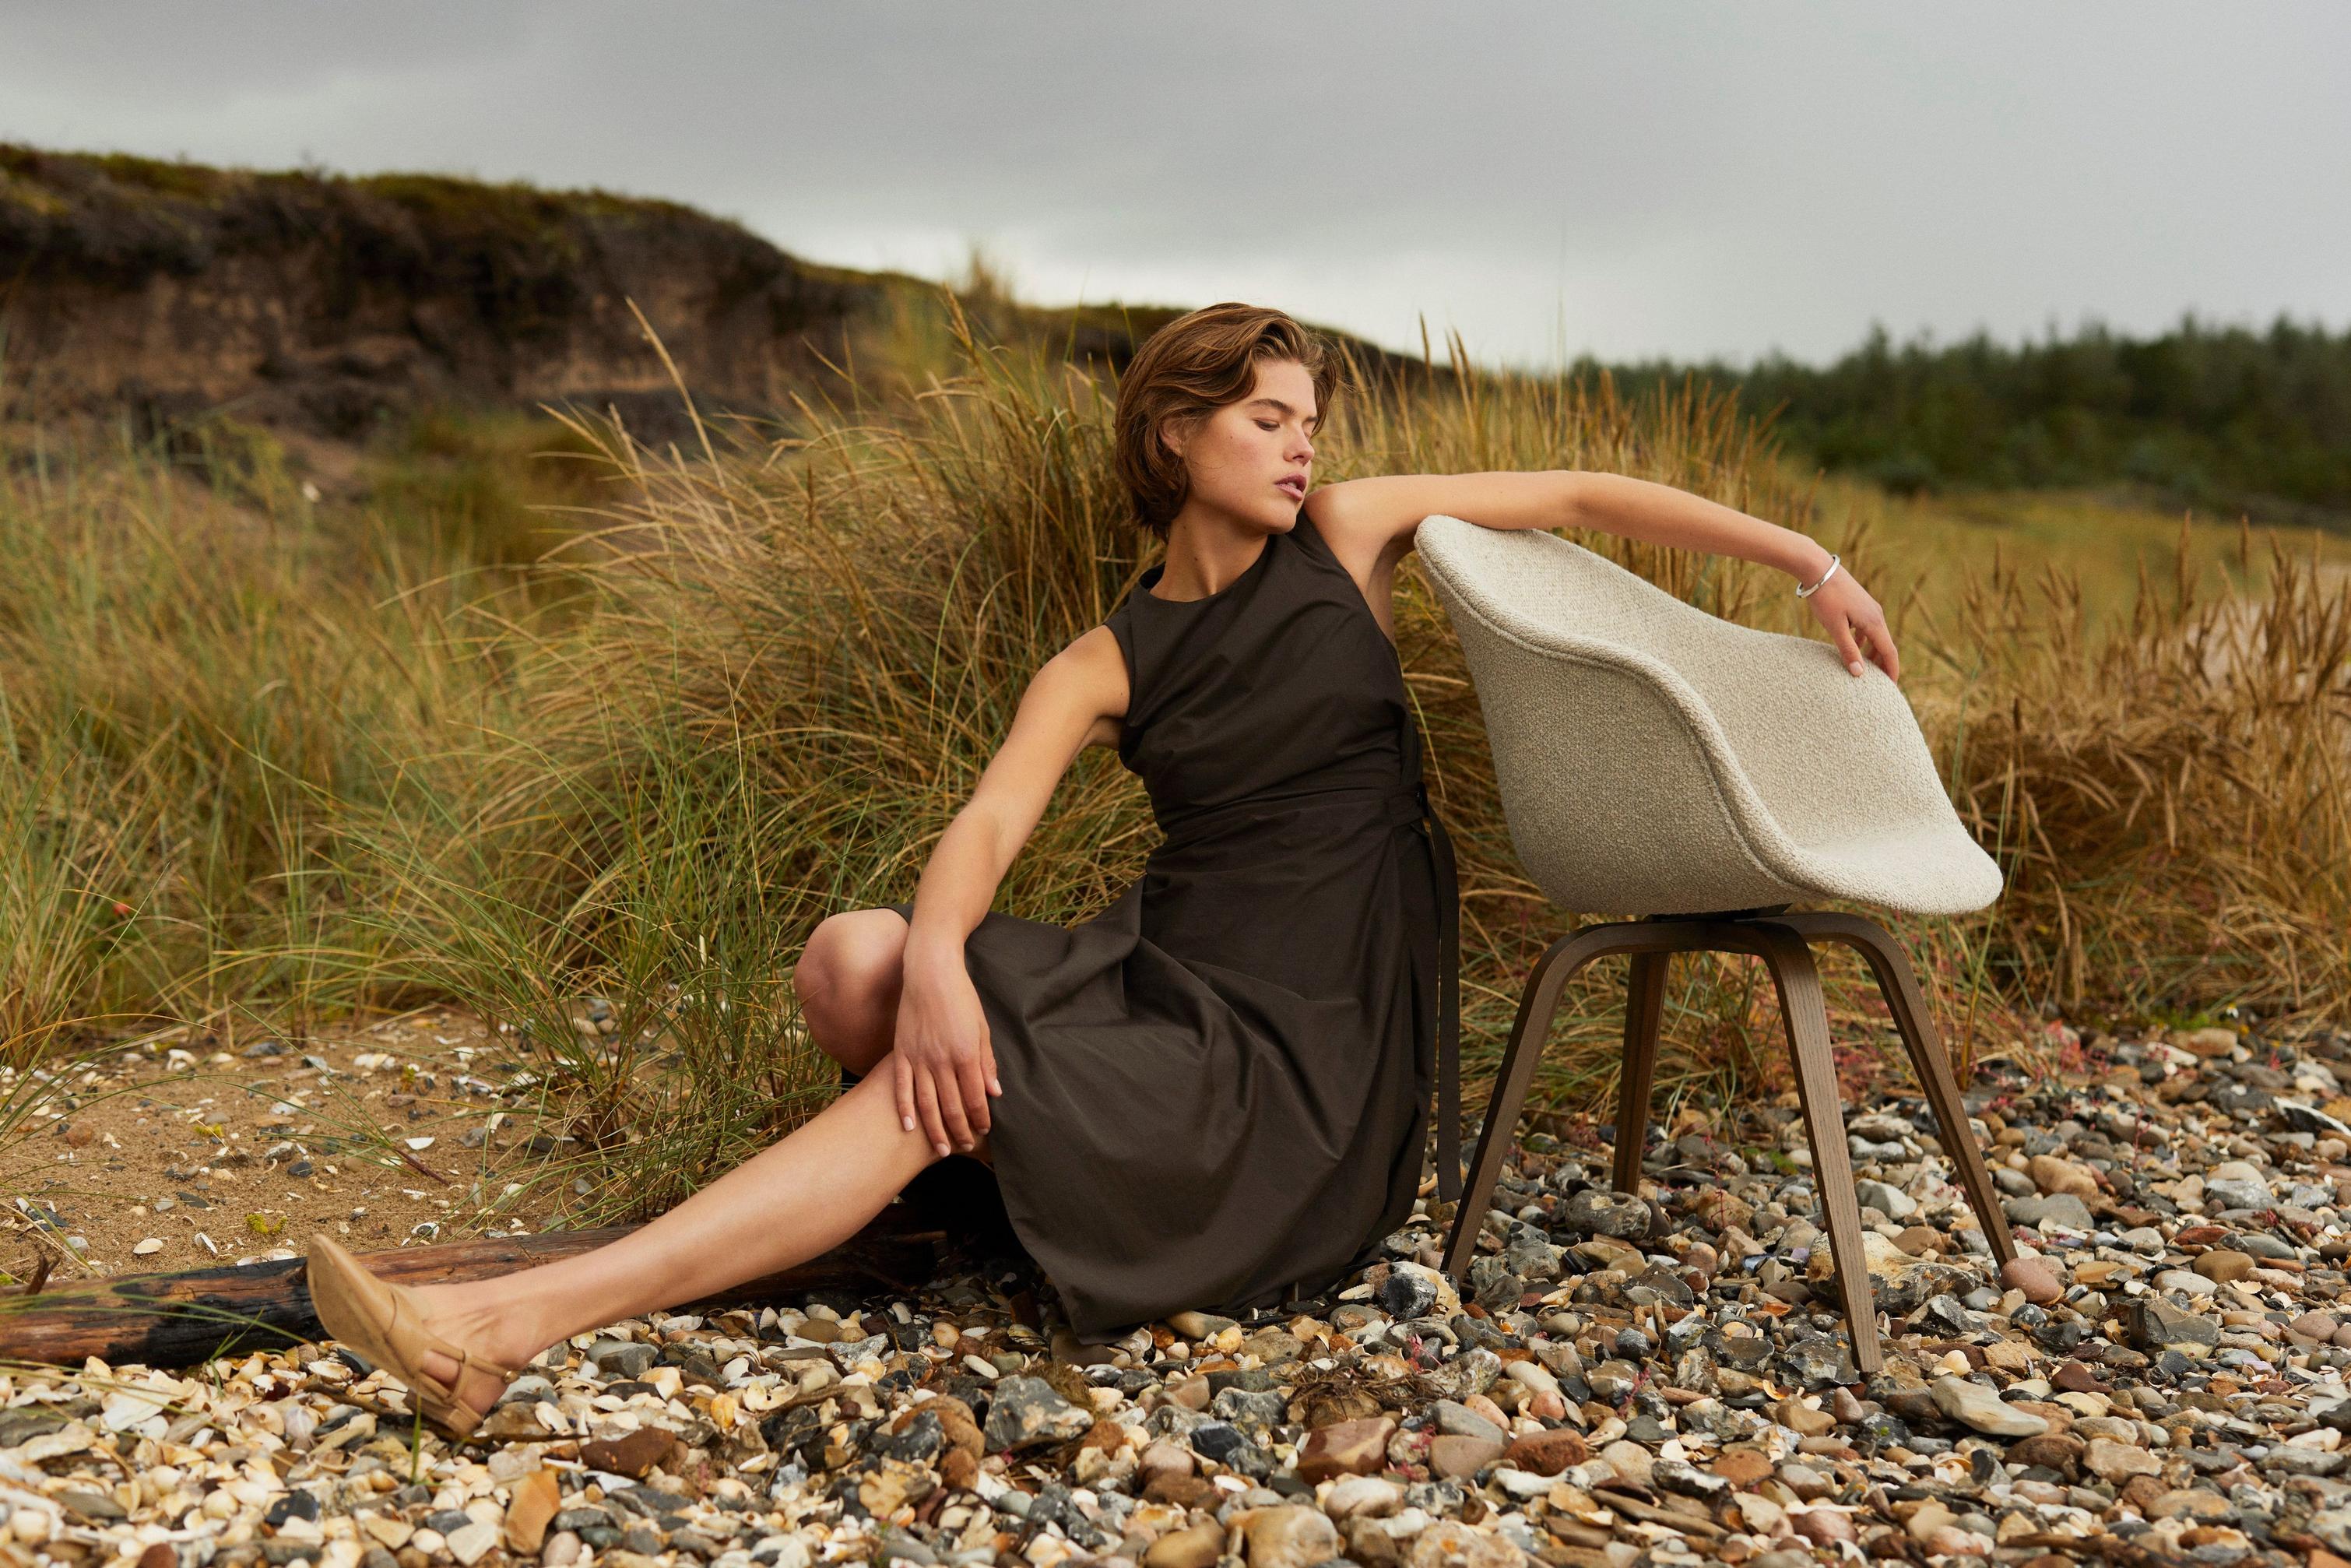 On a field next the beach, a woman leans on a Hauge dining chair covered in beige Lazio fabric